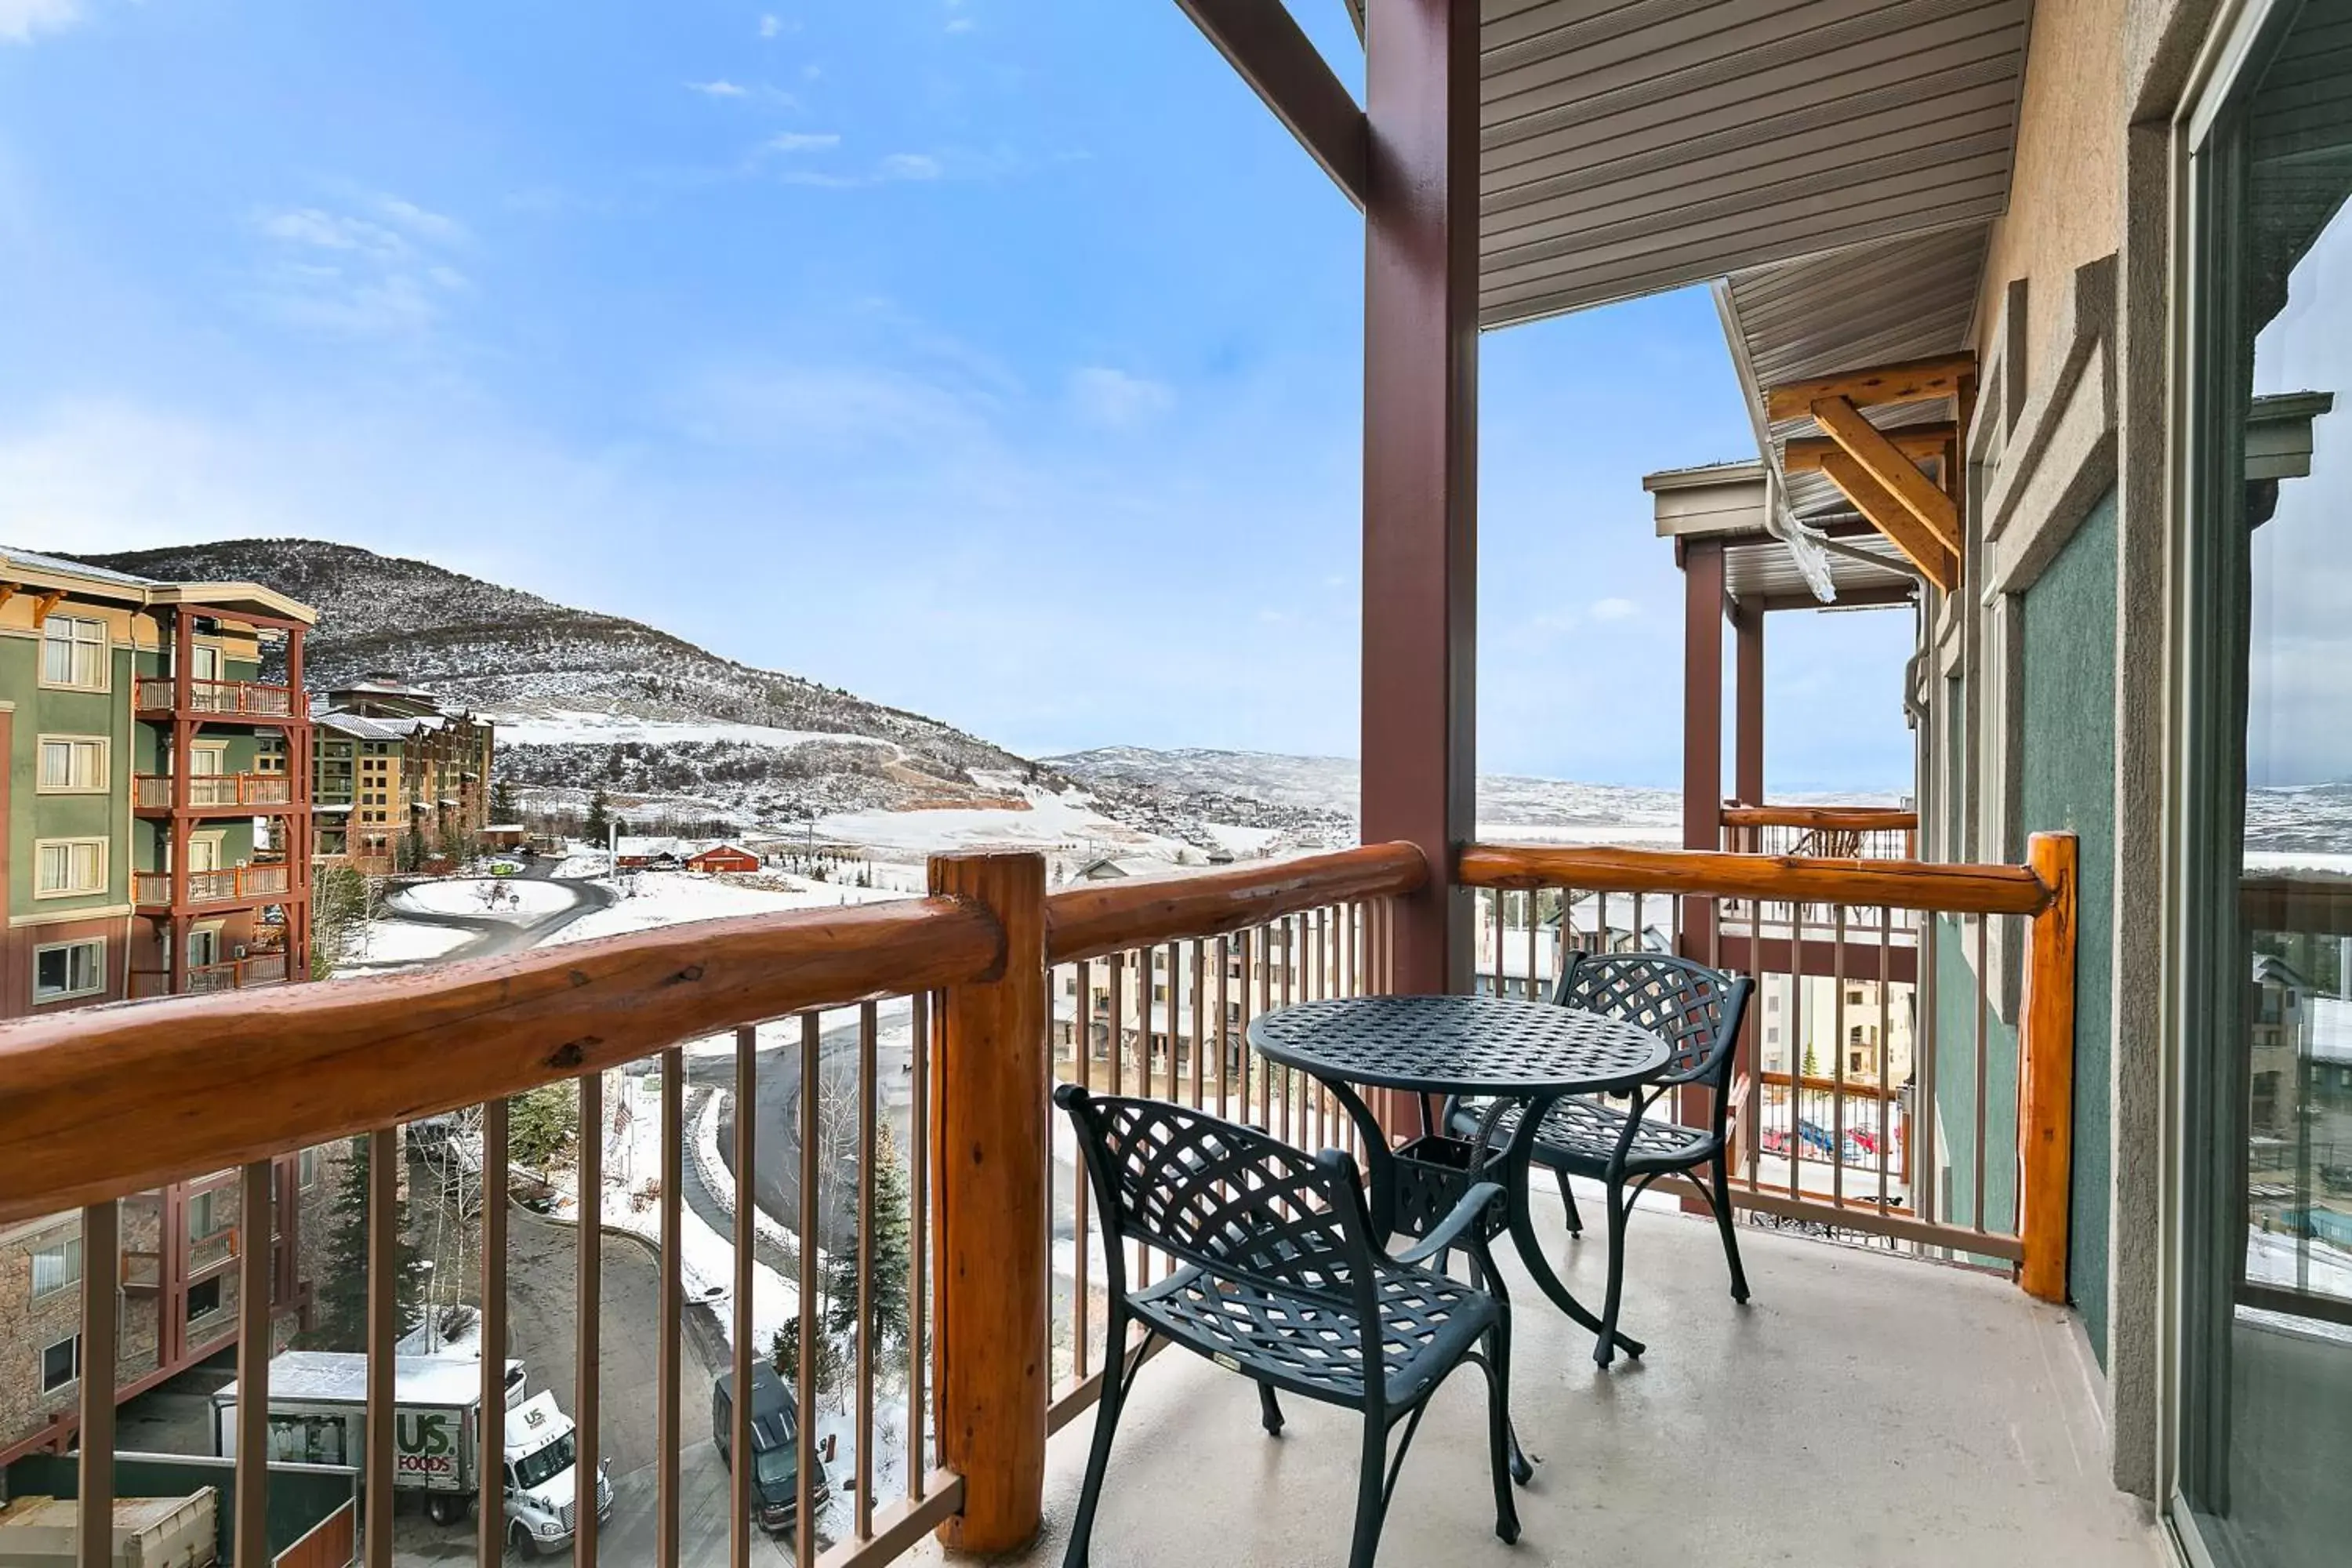 Balcony/Terrace in Condos at Canyons Resort by White Pines